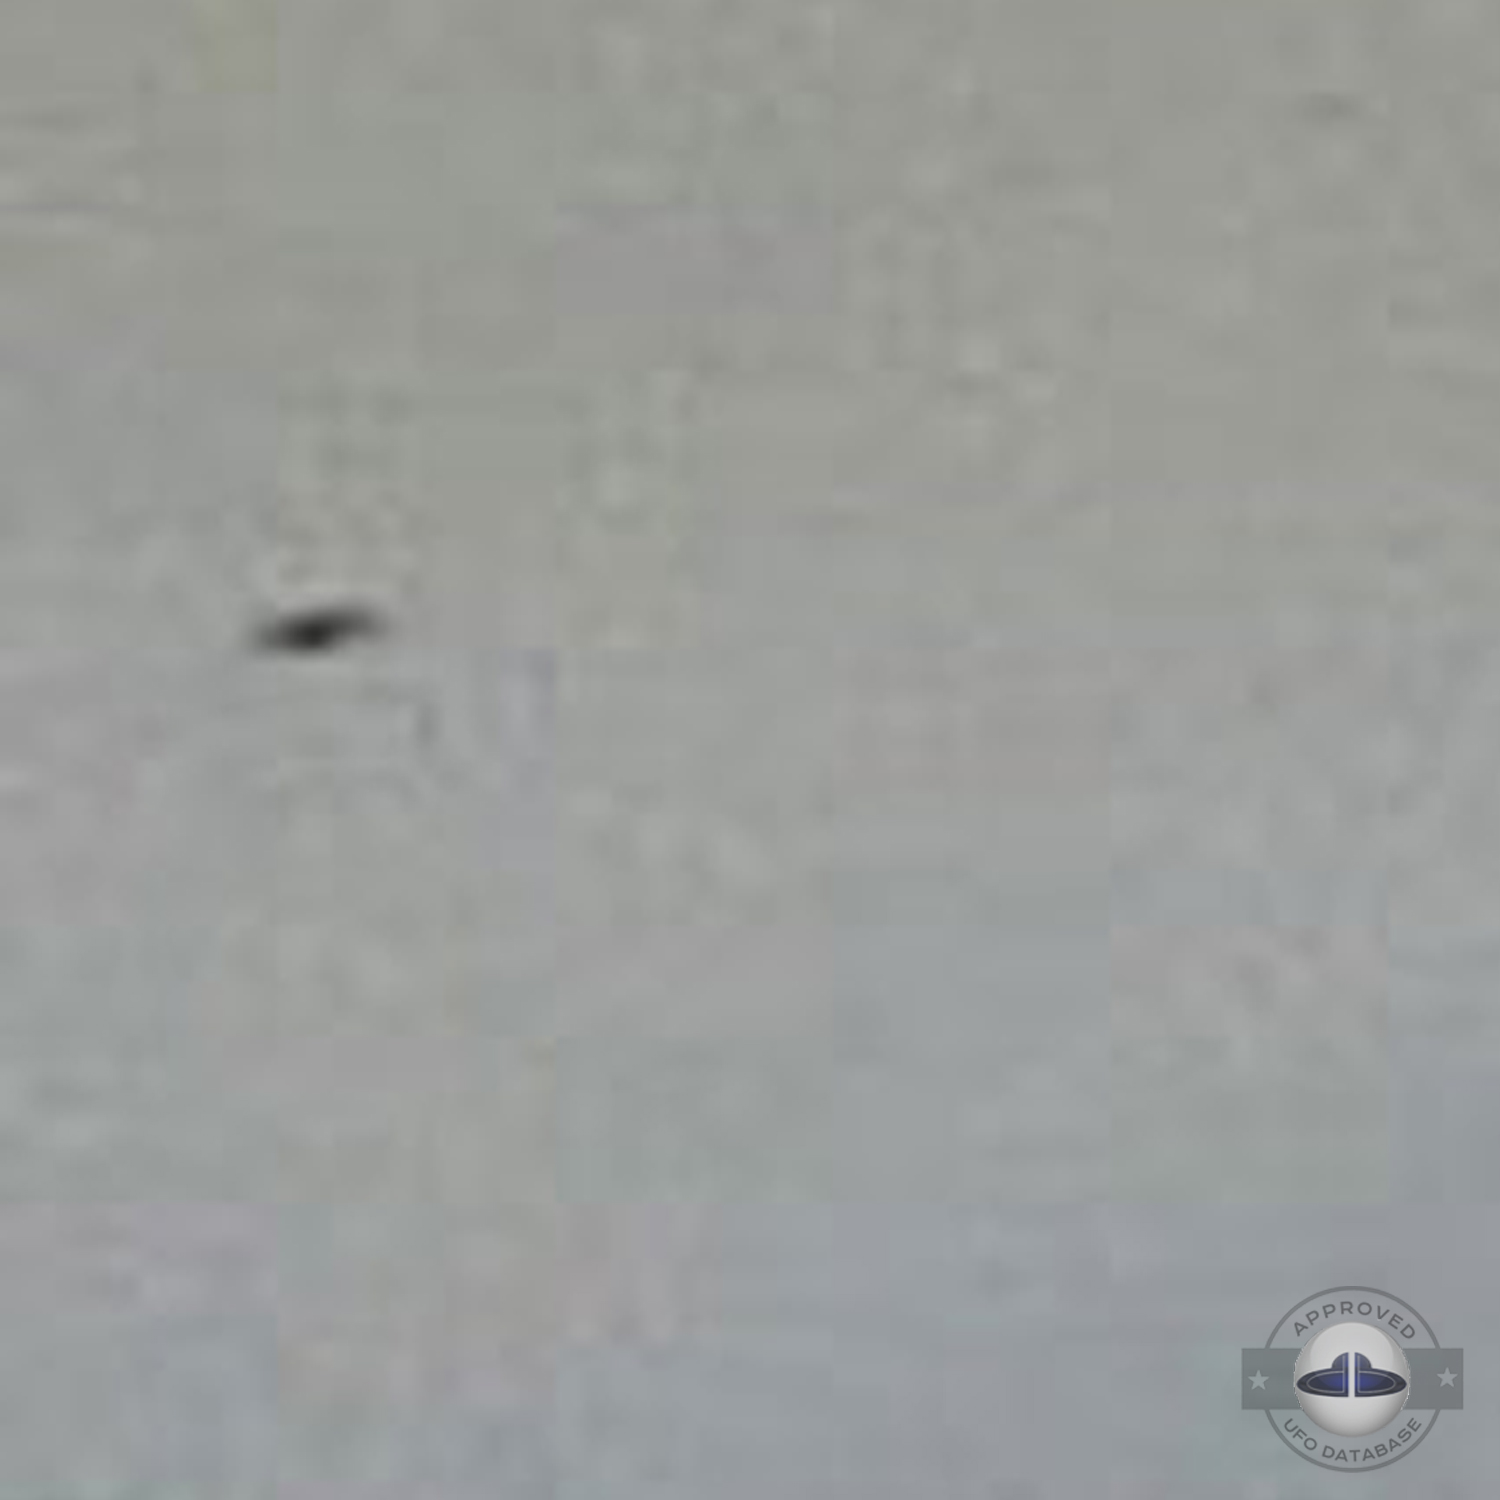 UFO picture taken in 2005 showing ufo close to coming airplane UFO Picture #24-3